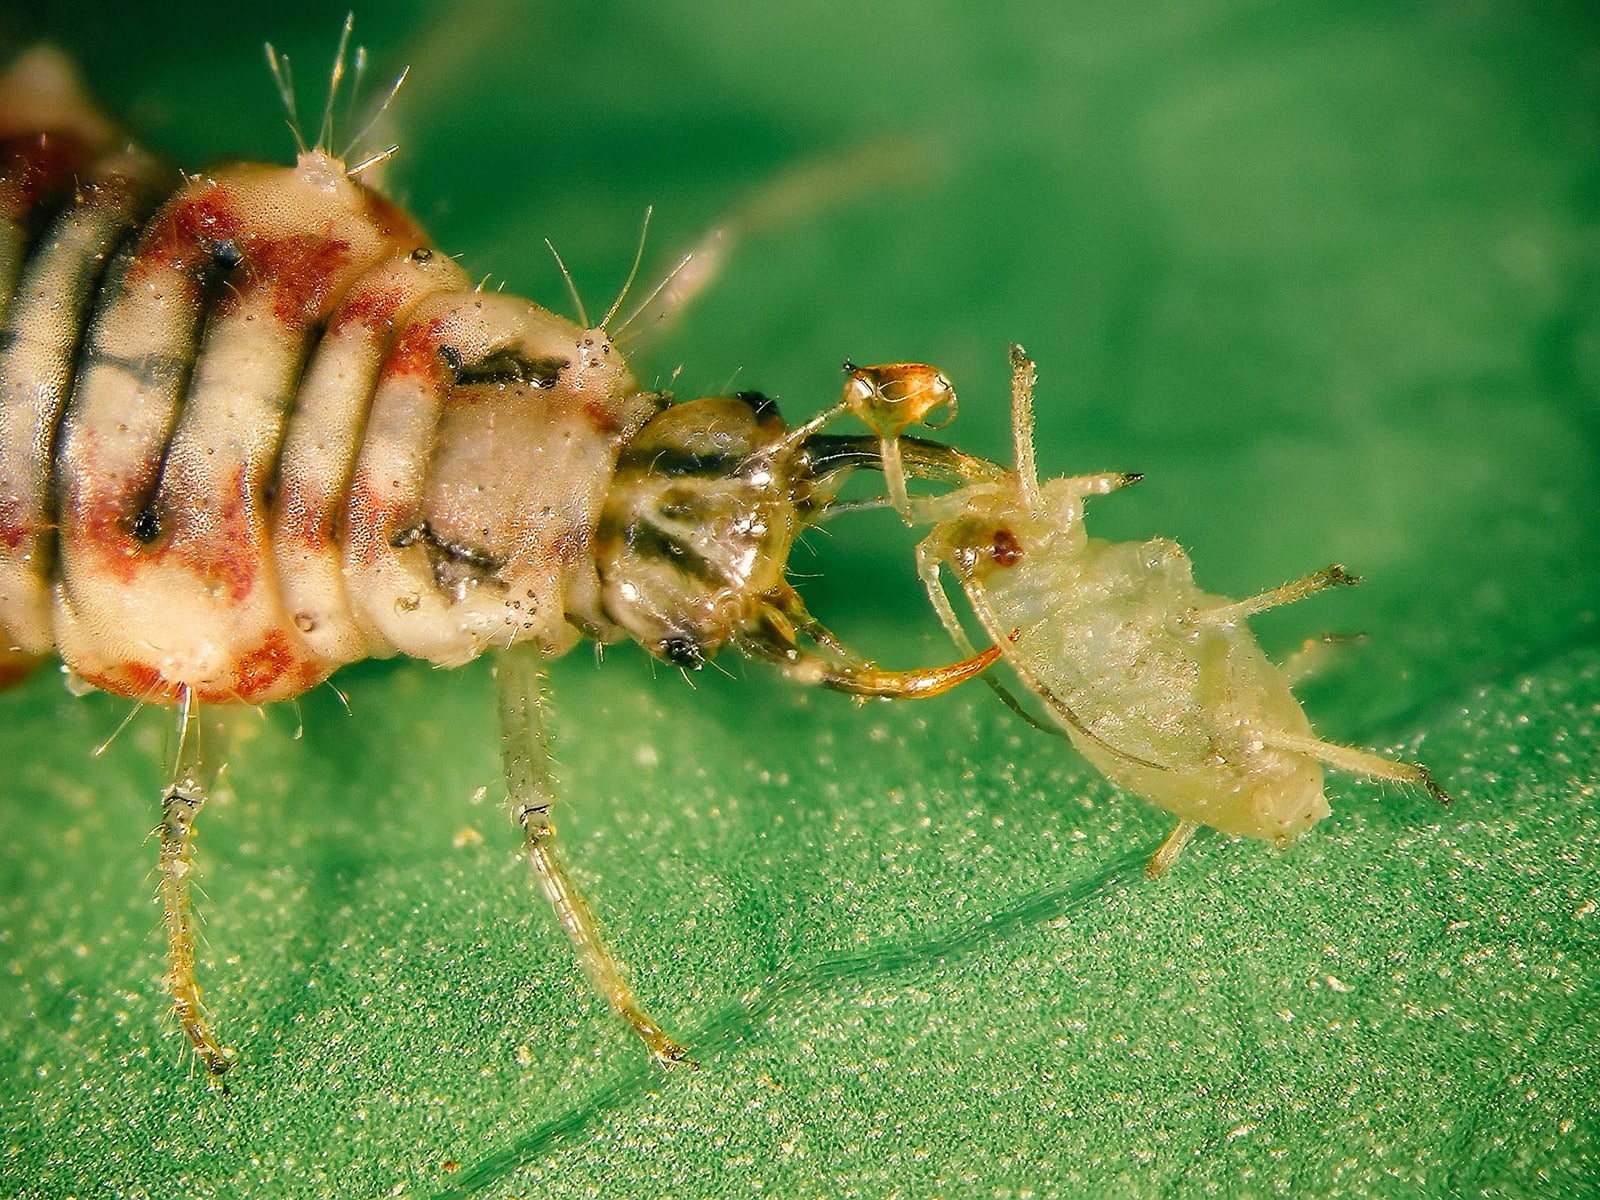 Close-up of lacewing larva attacking an aphid with its pincers and sucking the fluids out of it